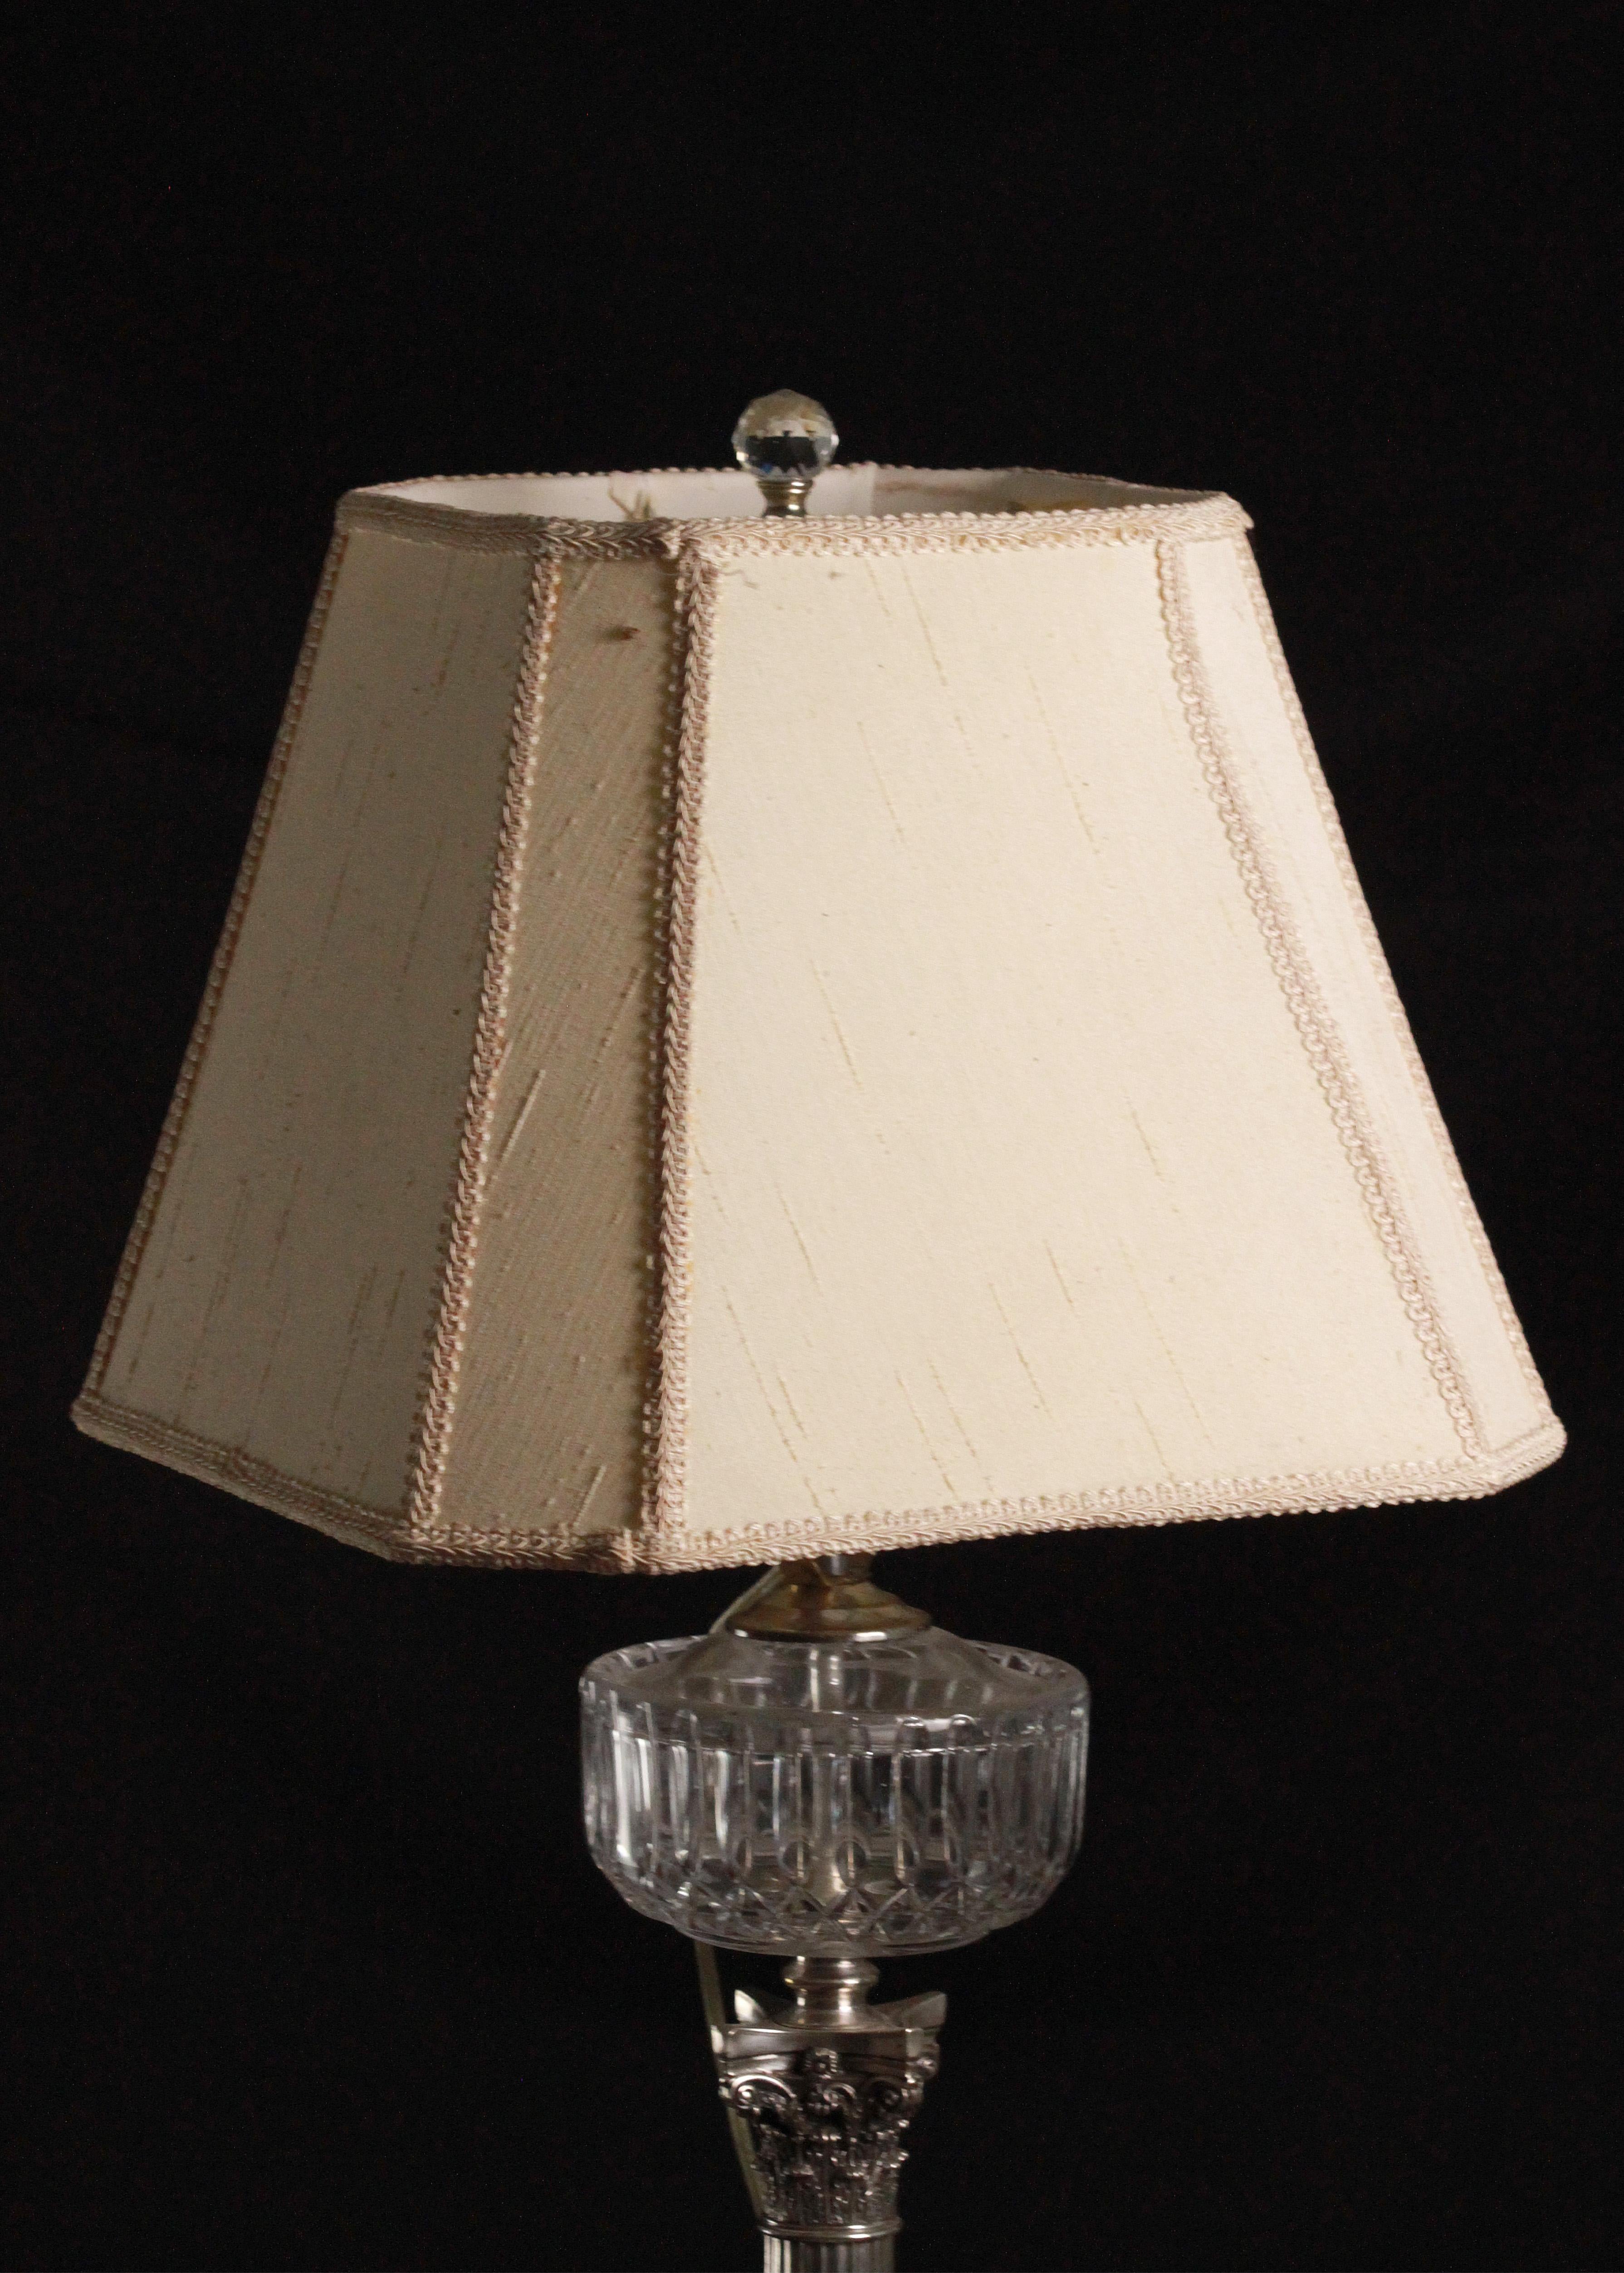 Scottish Early 20th Century Sterling Silver Table Lamp by Hamilton & Inches, Ltd. For Sale